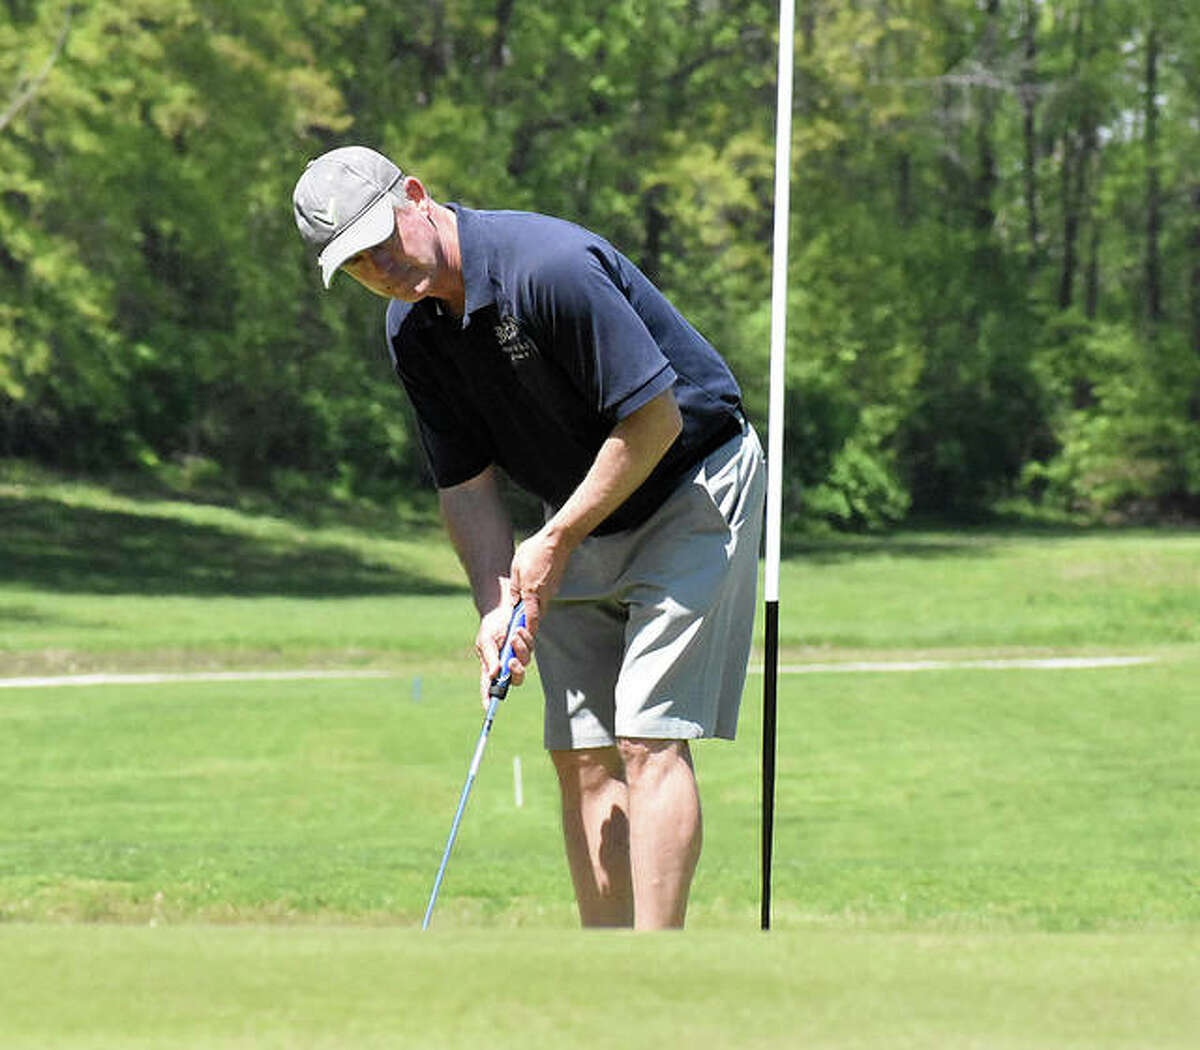 Edwardsville resident Dave Wasmuth reacts to his putt on the No. 9 hole at Oak Brook Golf Club on Friday.